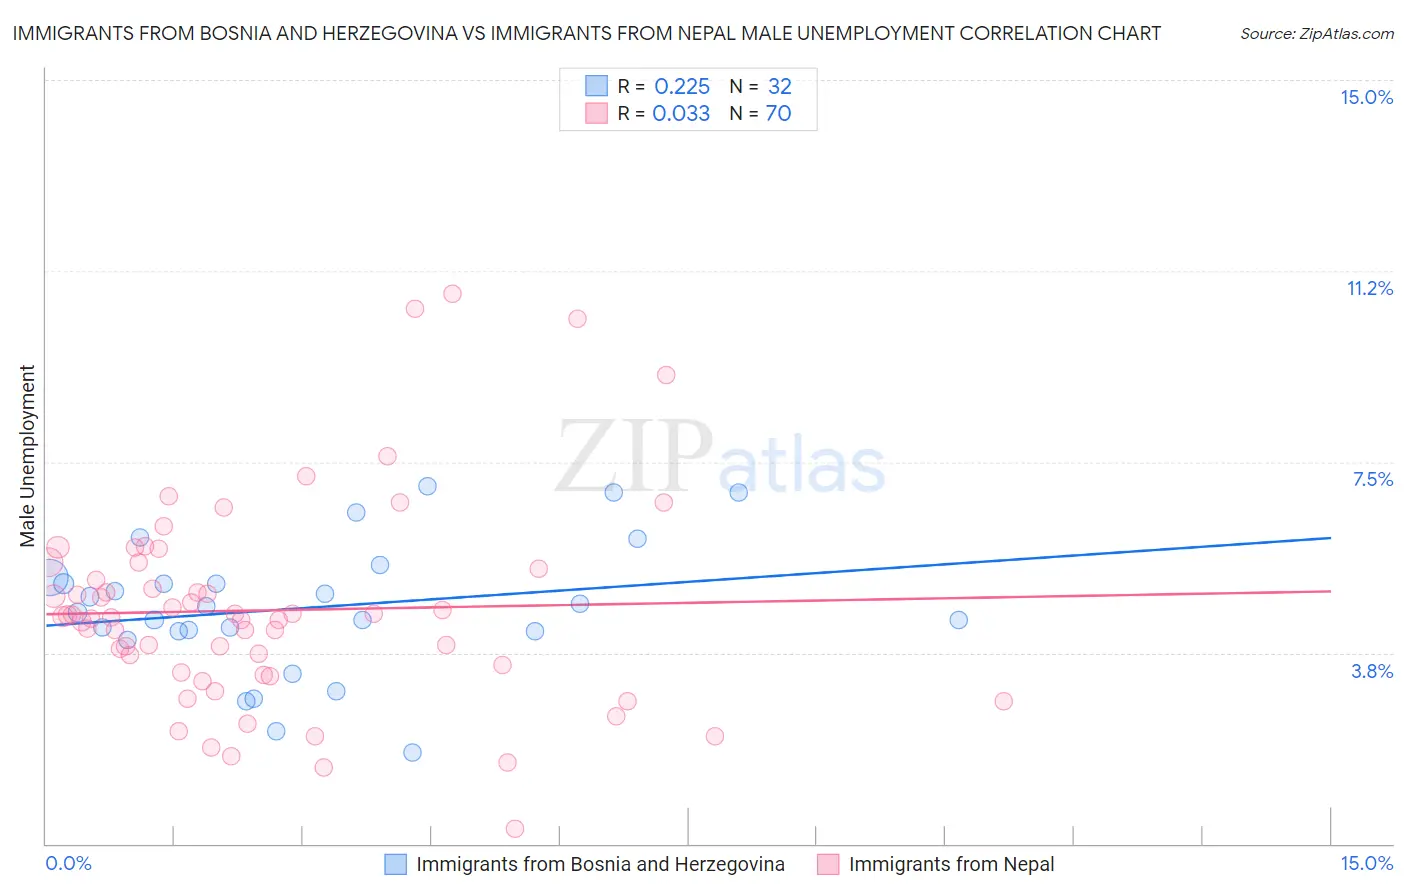 Immigrants from Bosnia and Herzegovina vs Immigrants from Nepal Male Unemployment